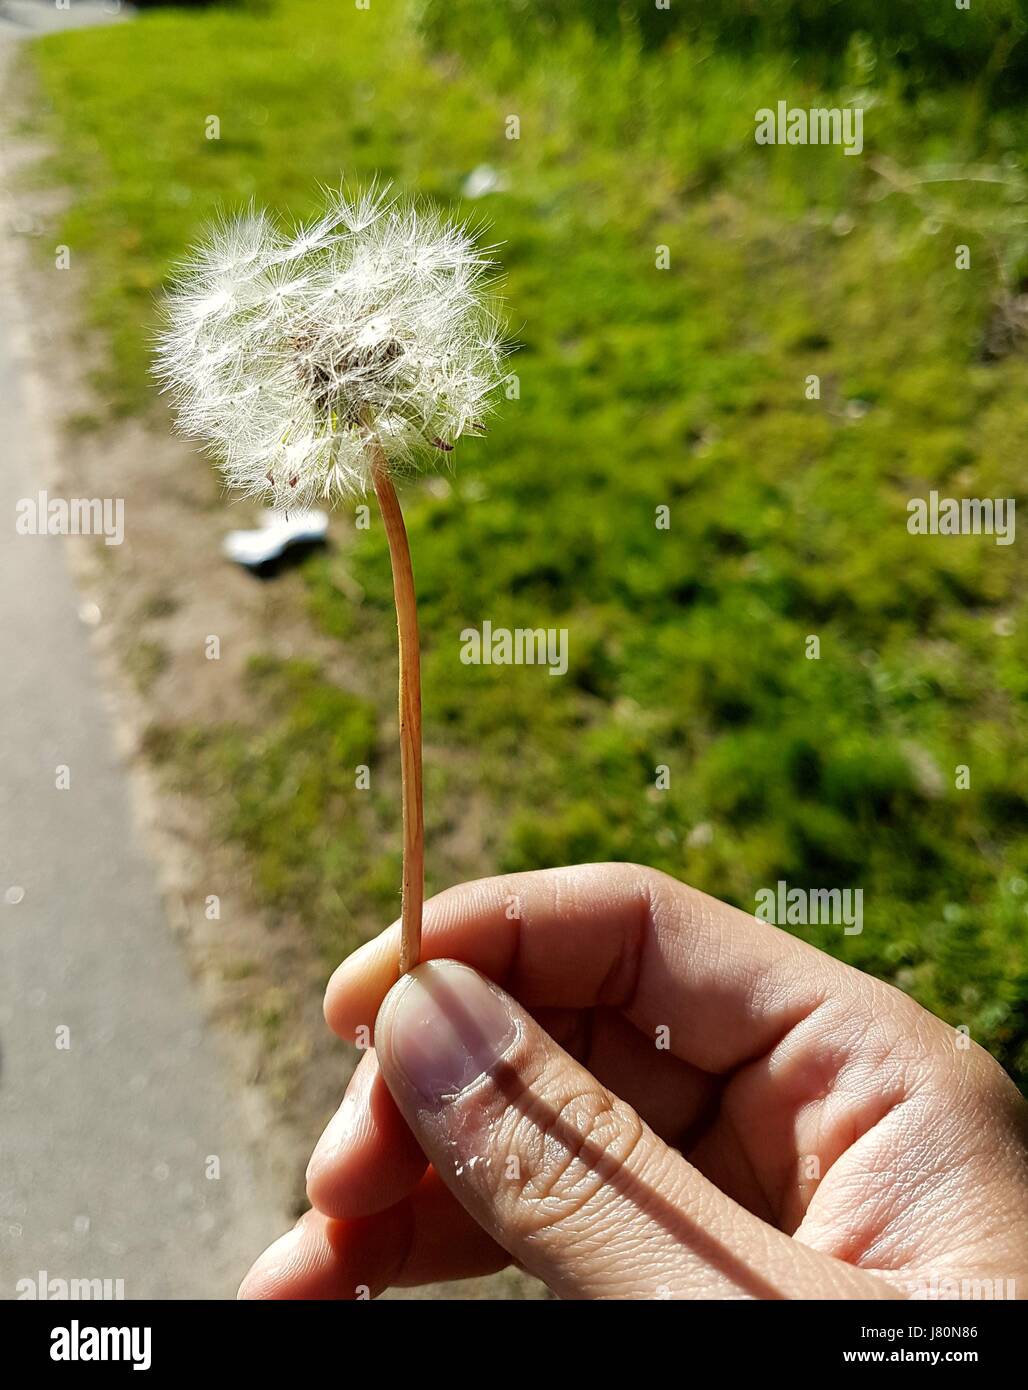 A man holding Dandelion in his right hand while it creates shadow on his hand Stock Photo